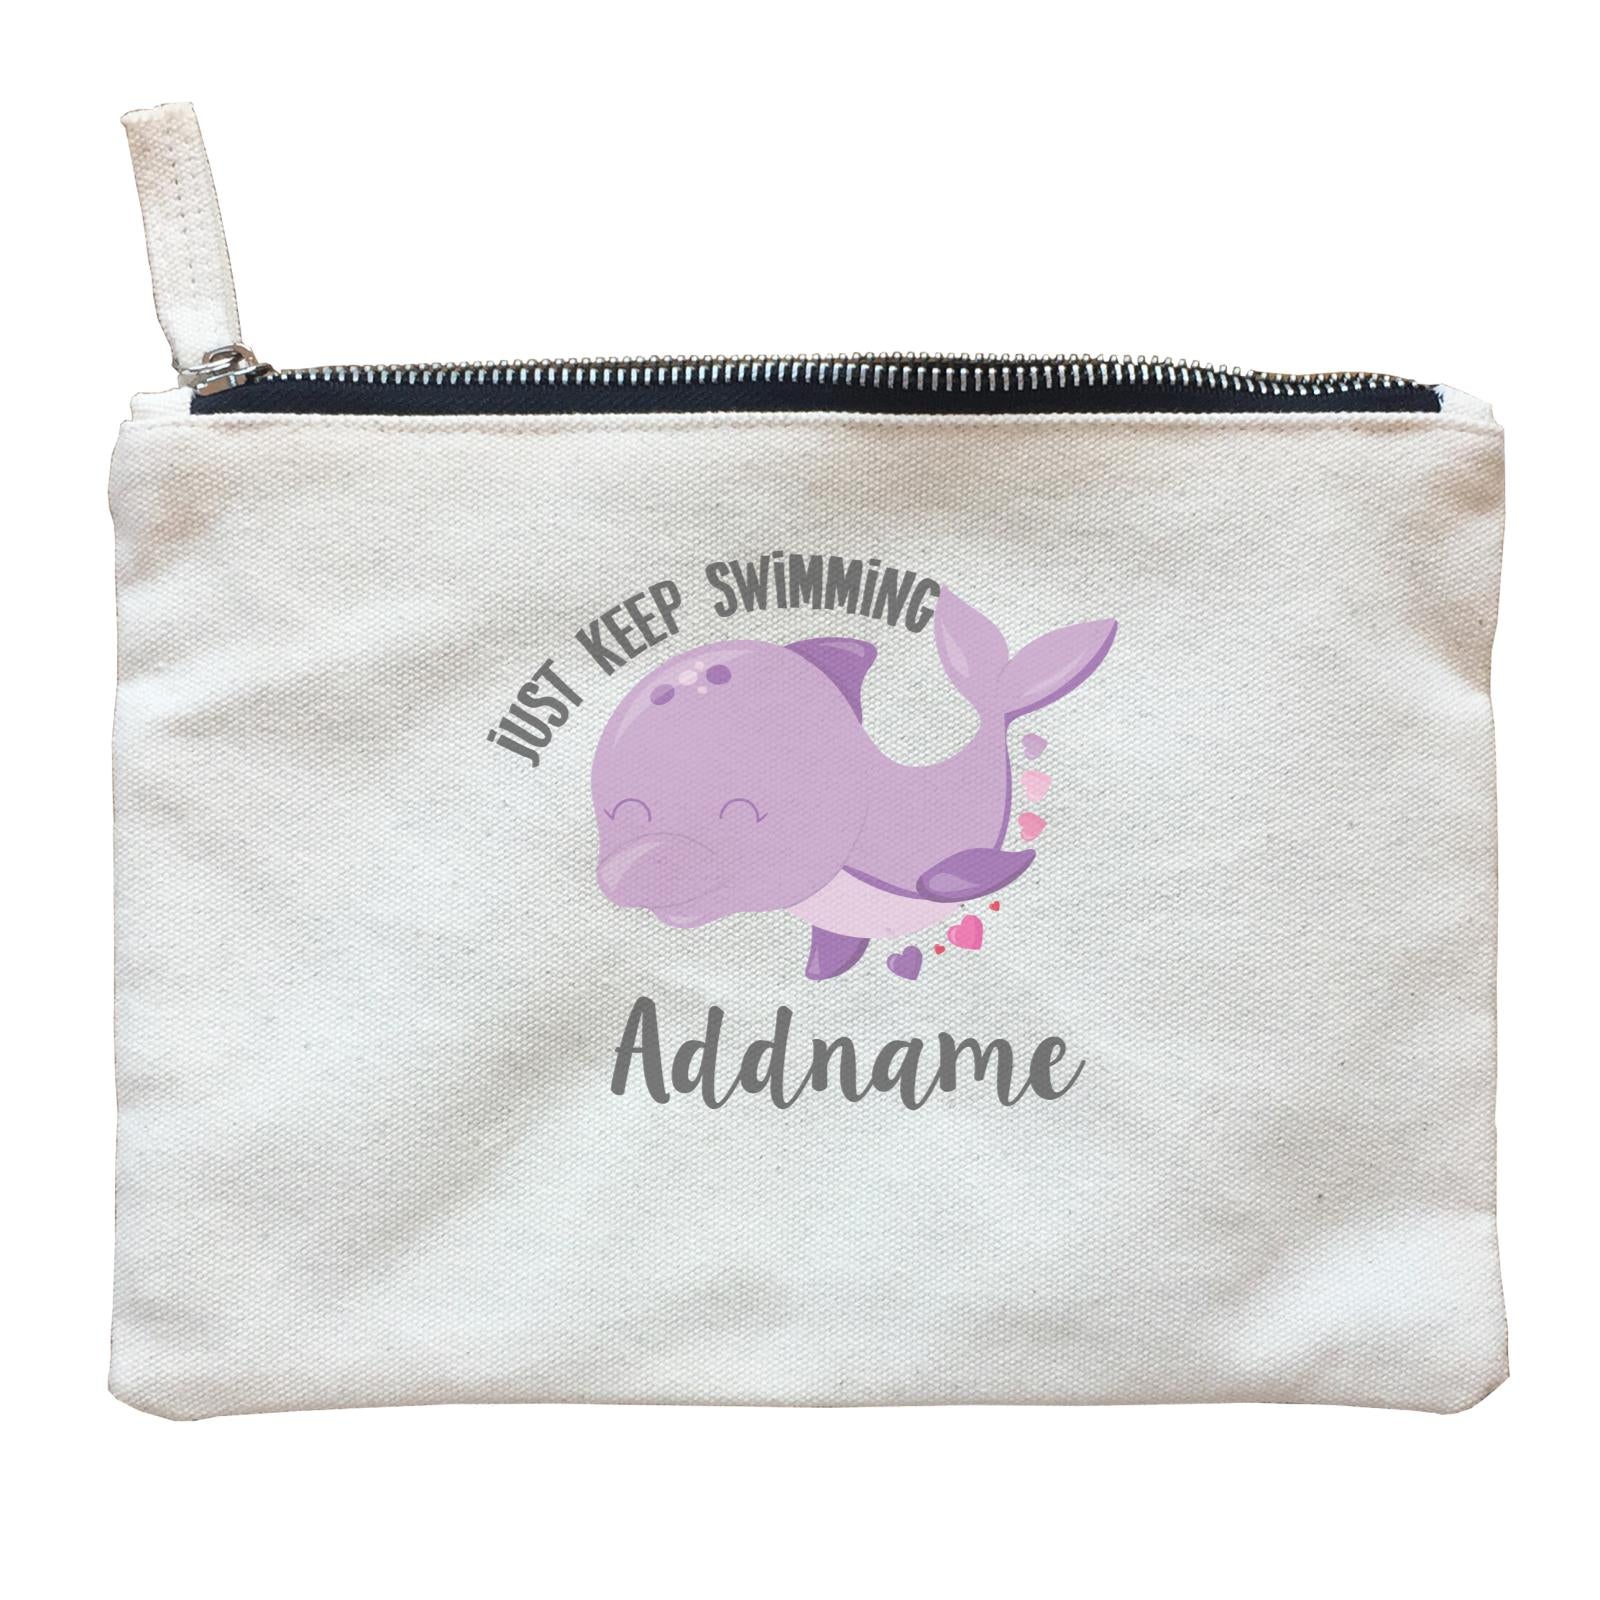 Cute Sea Animals Dolphin Just Keep Swimming Addname Zipper Pouch